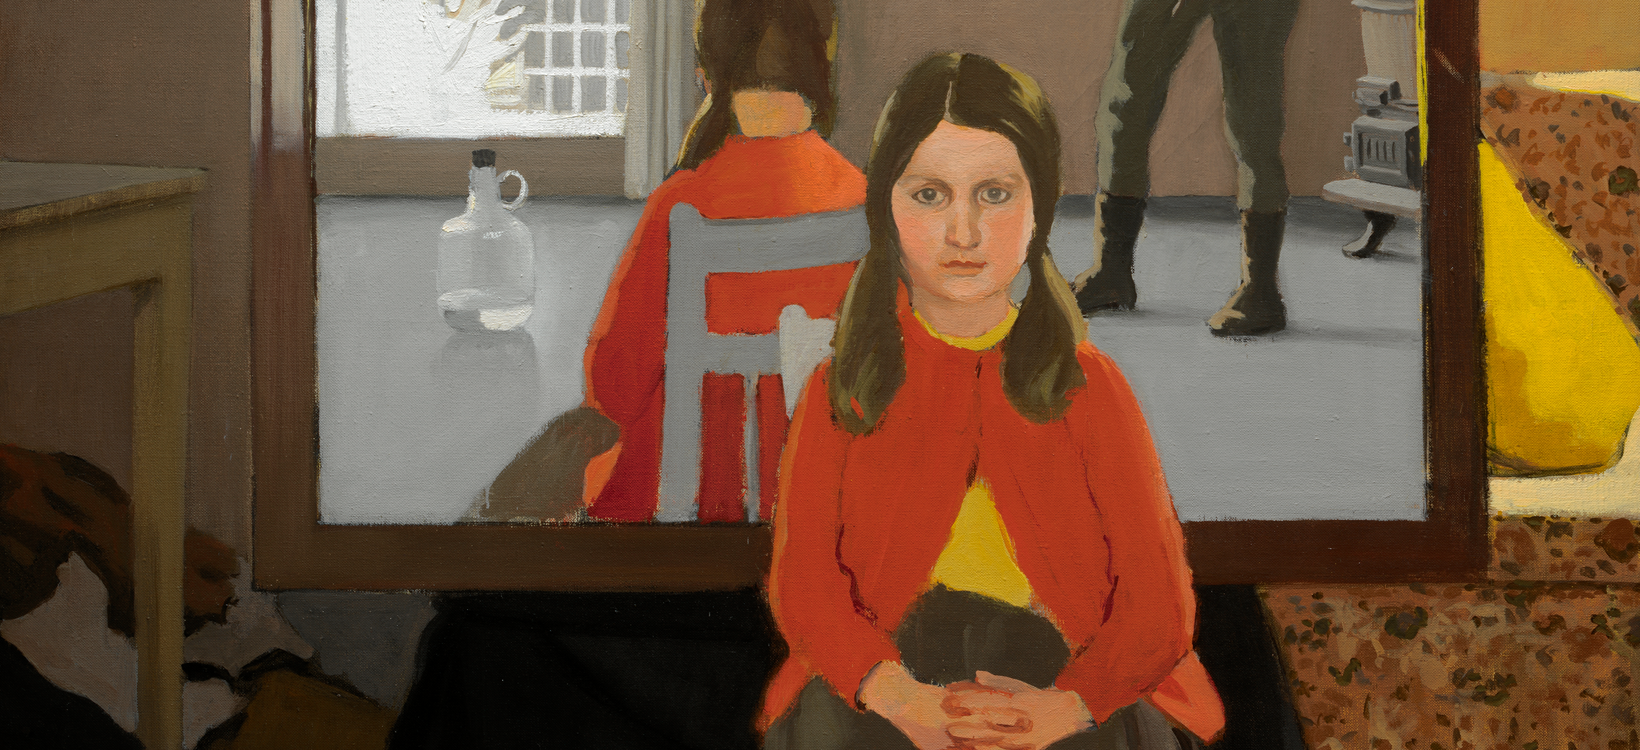 The Mirror by Fairfield Porter